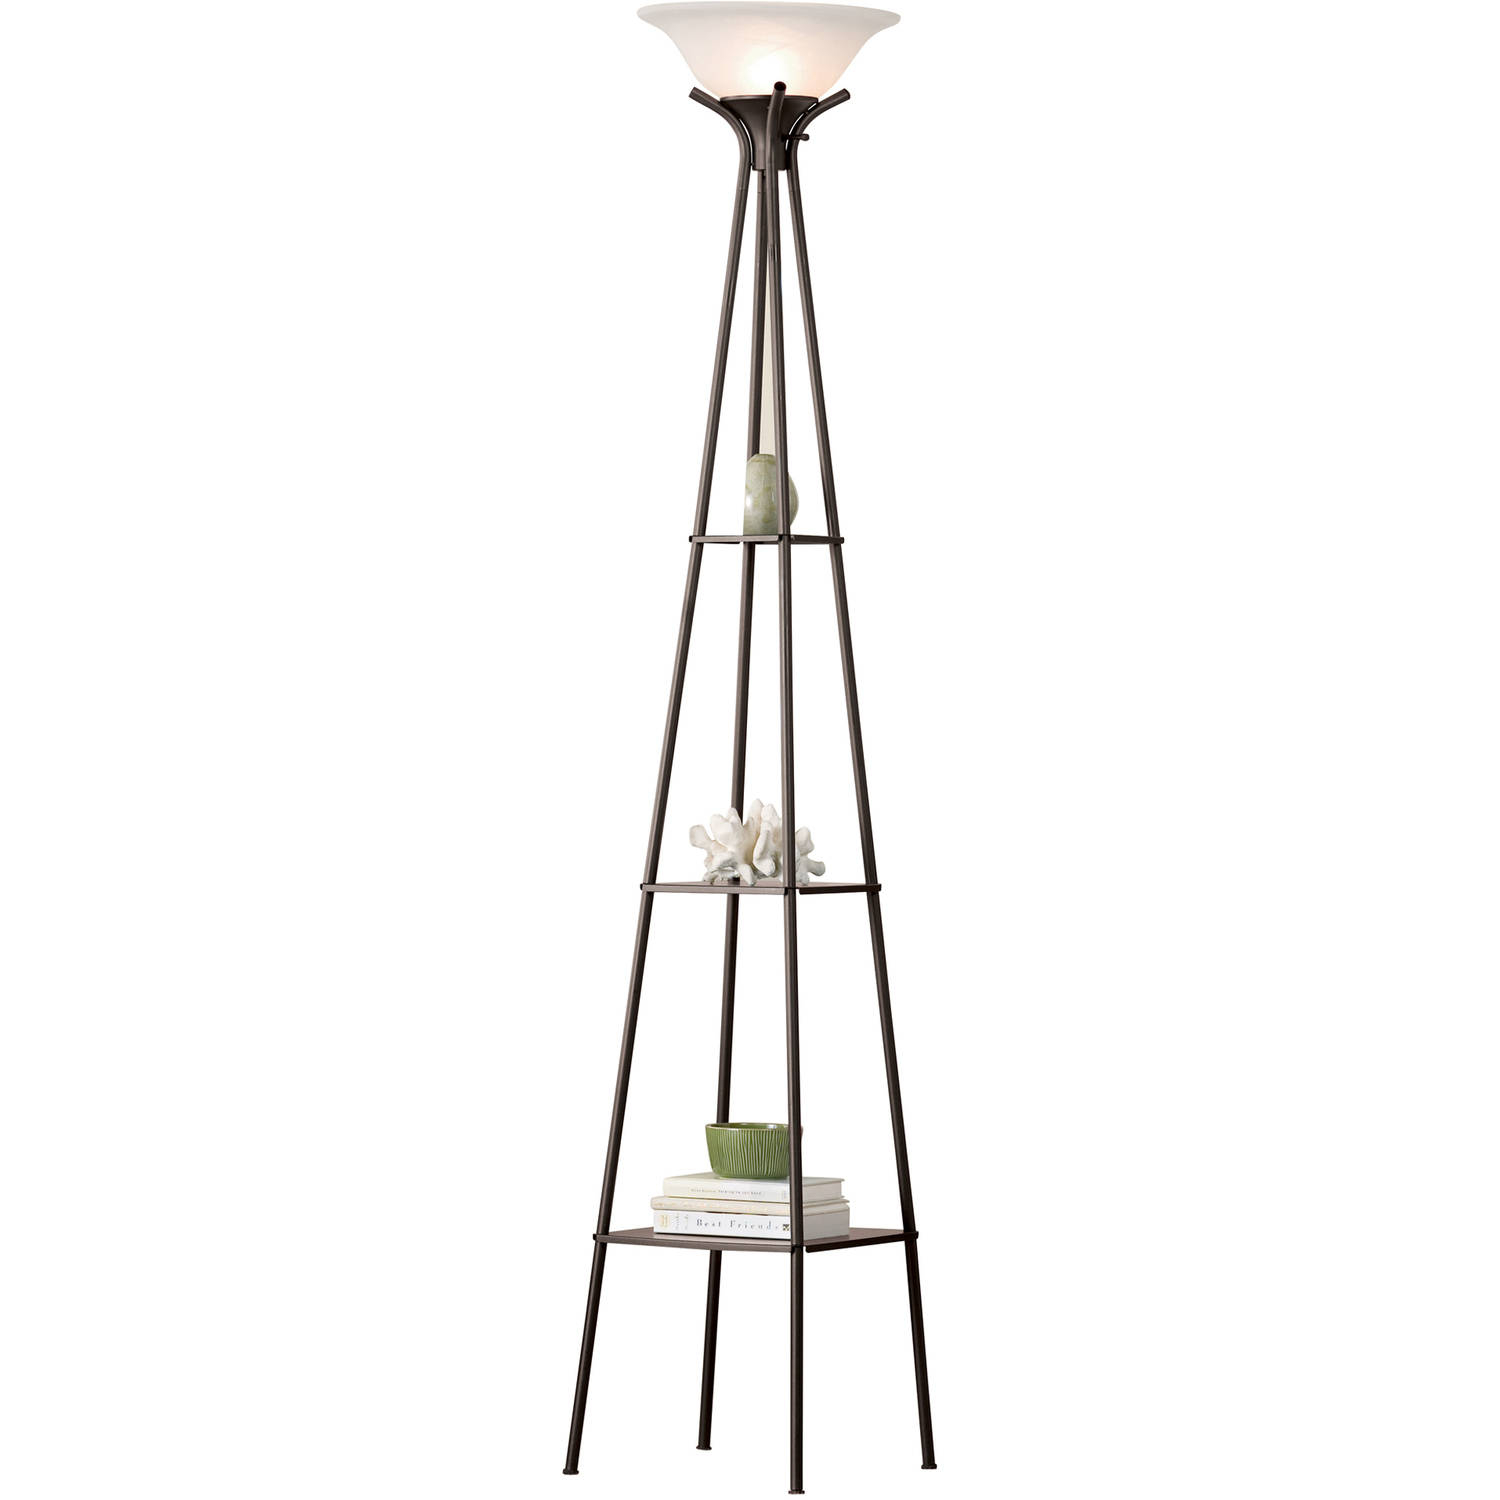 Mainstays 69 Etagere Floor Lamp Charcoal Finish Led Bulb Included Walmart with regard to sizing 1500 X 1500